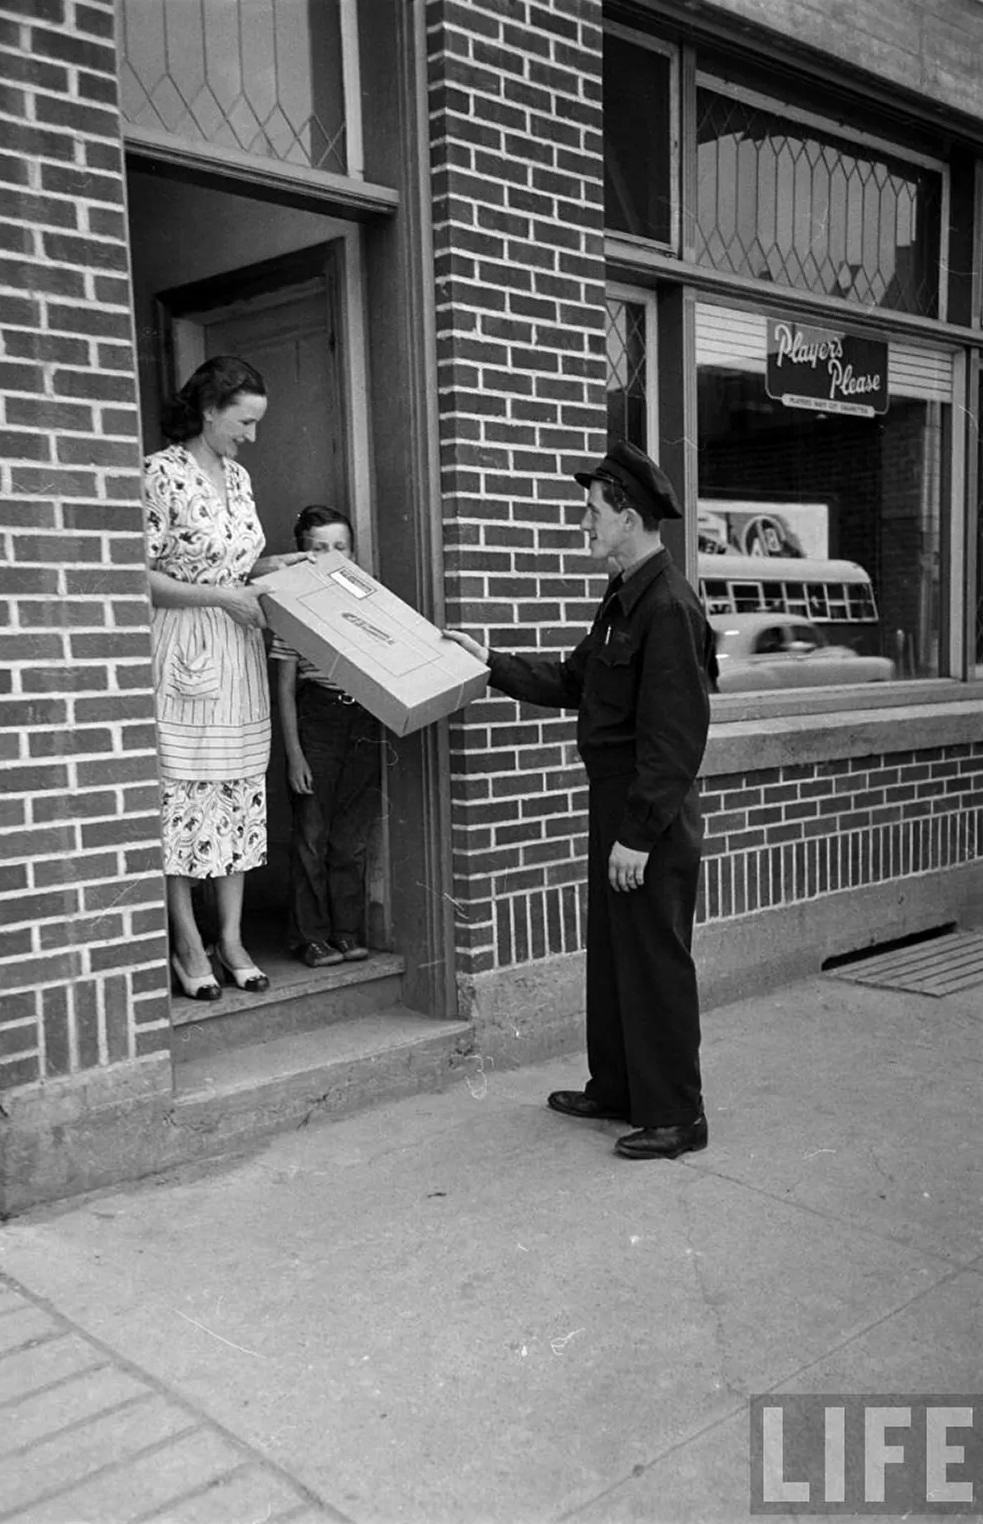 Pre-Internet Online Shopping Store: Customers Ordered Products from the Screens and the Company Shipped